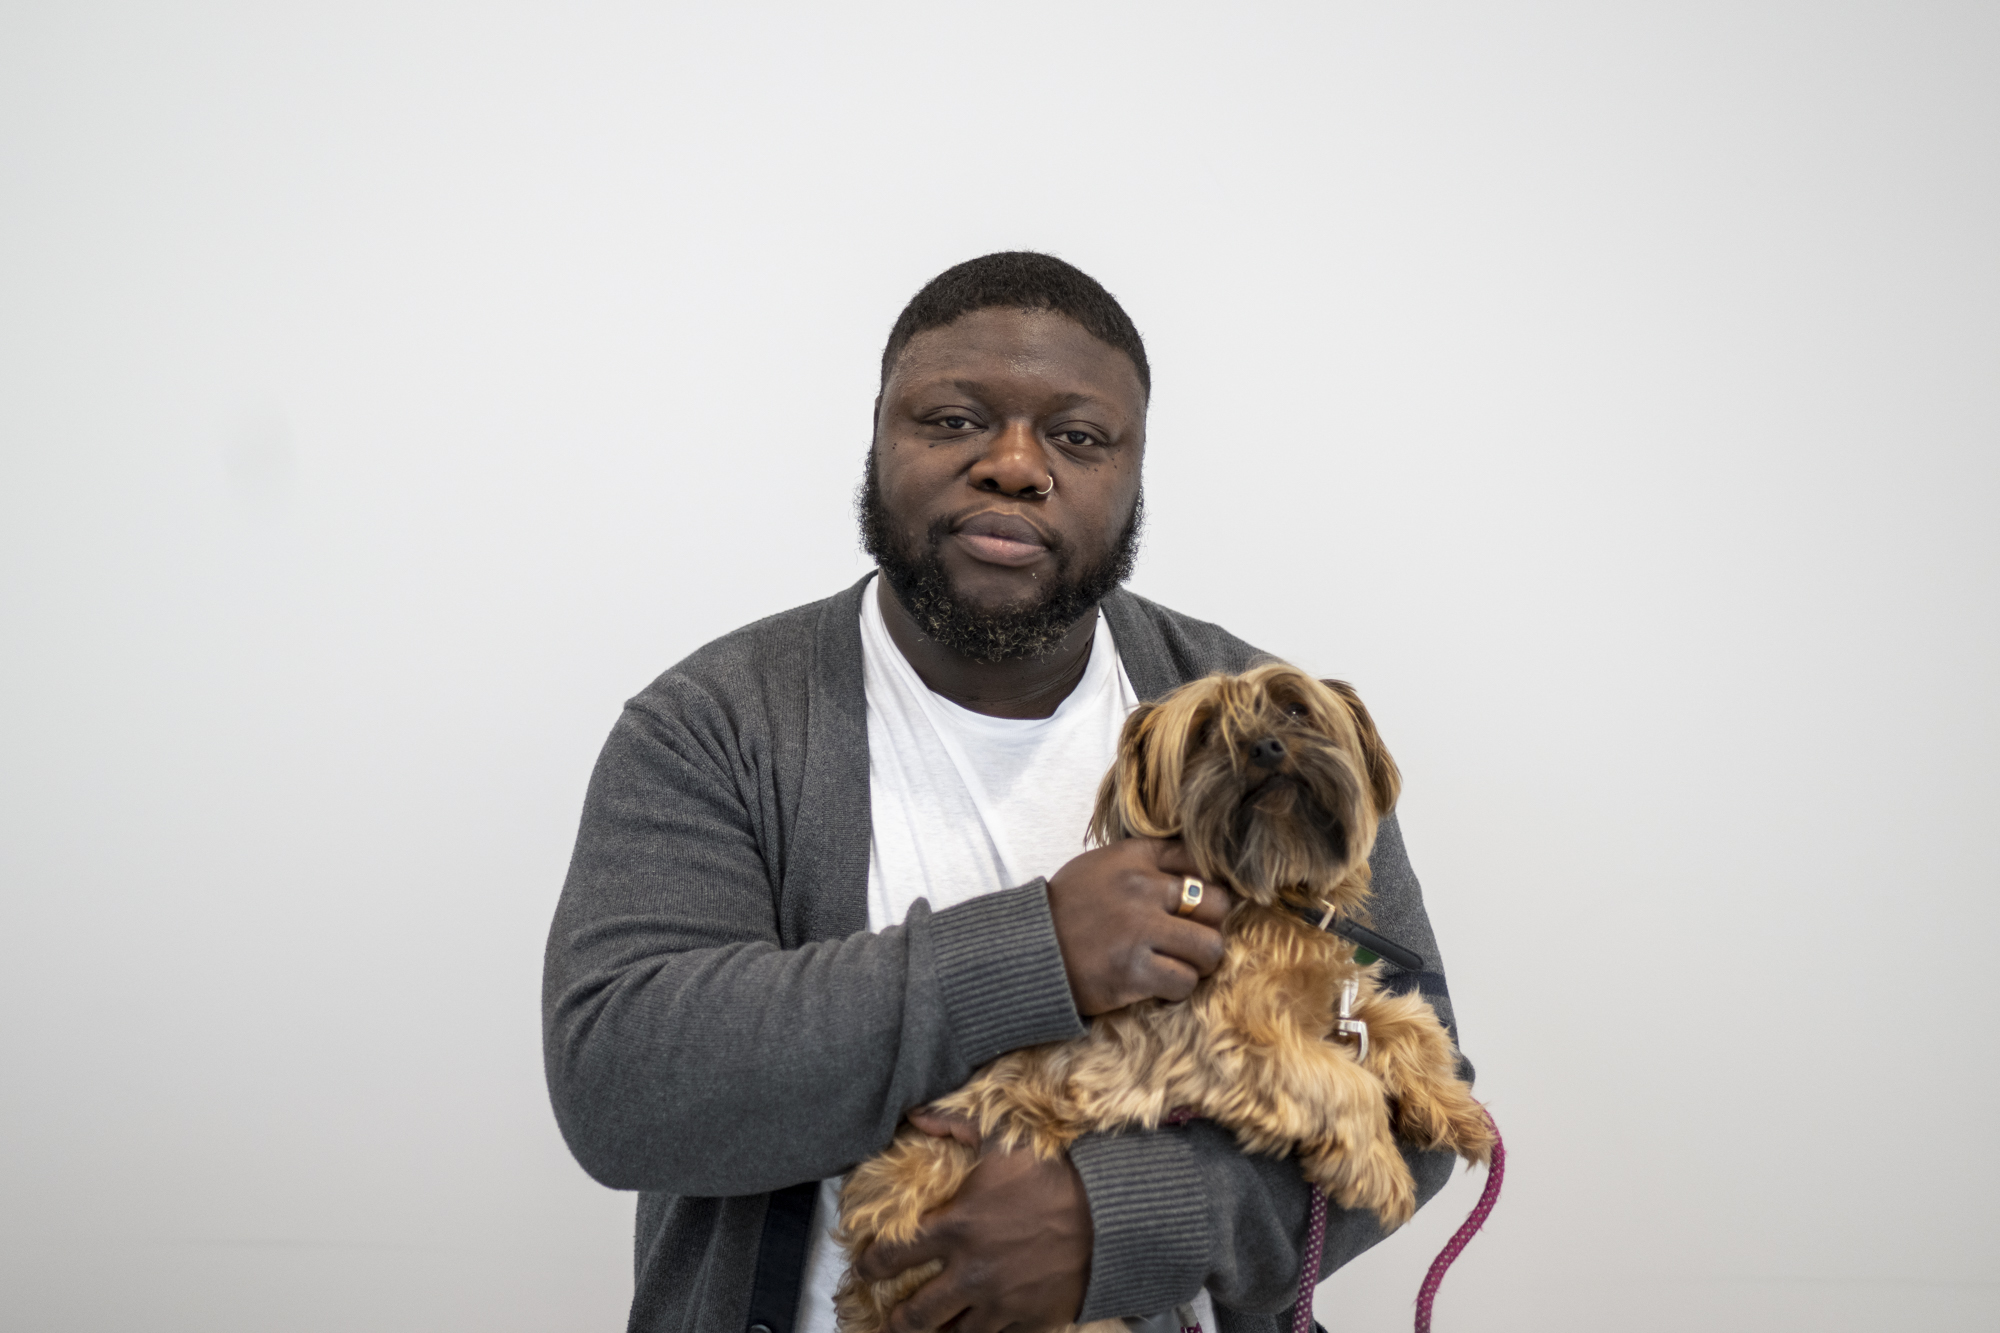 A Black man with short black hair and a sort of long black beard and a nose-ring holds a small dog and stands against a blank wall. He wears a white T-shirt and a gray cardigan sweater.